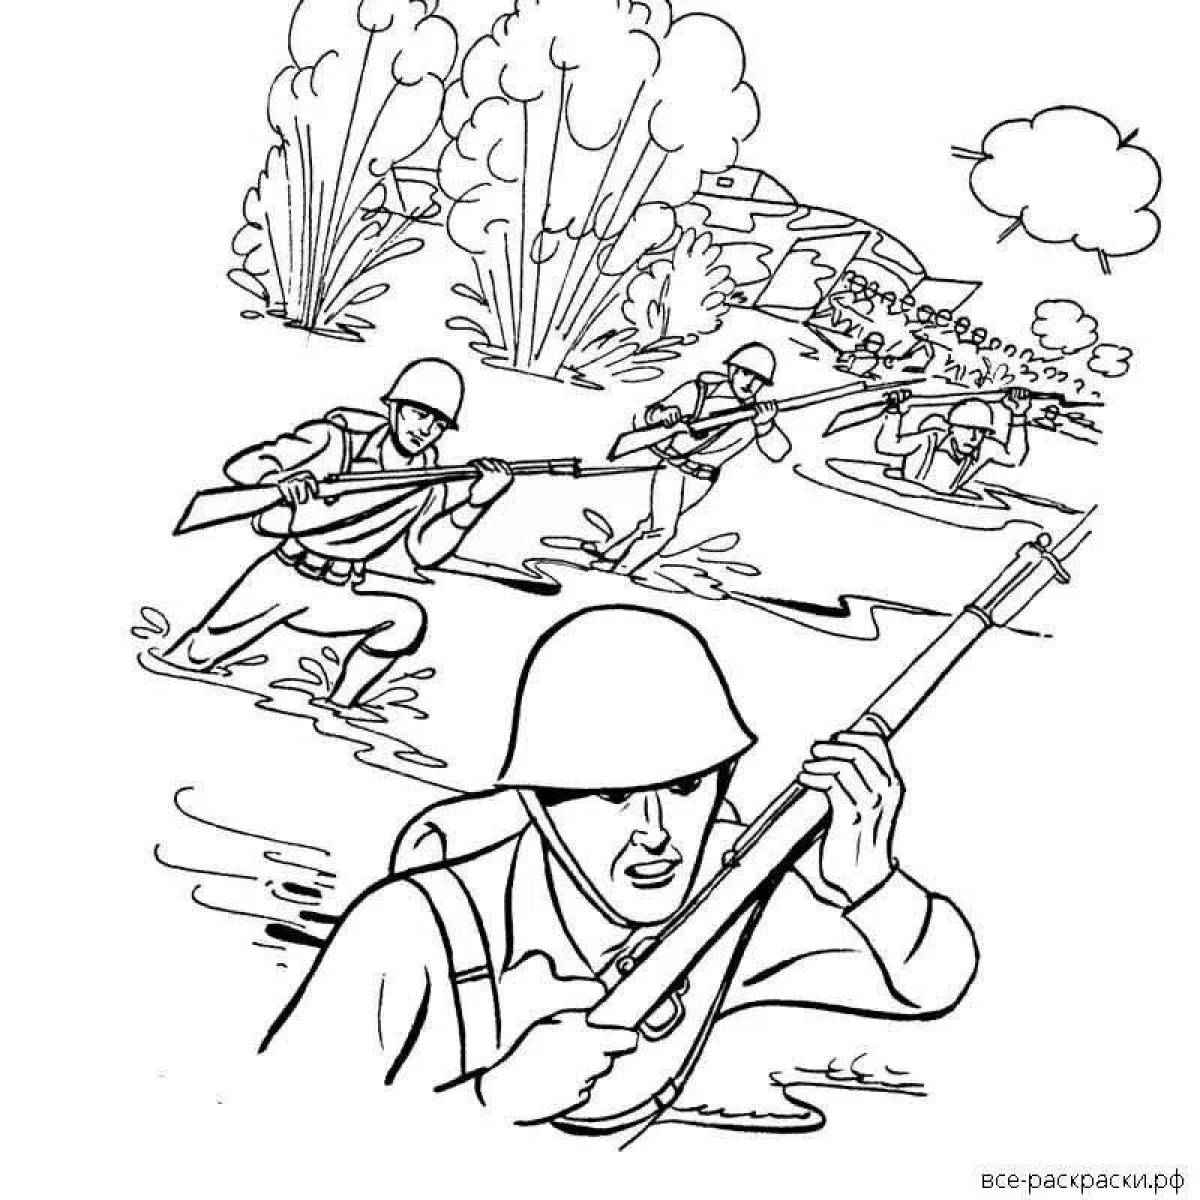 Coloring Pages For children war 1941 1945 (38 pcs) - download or print ...